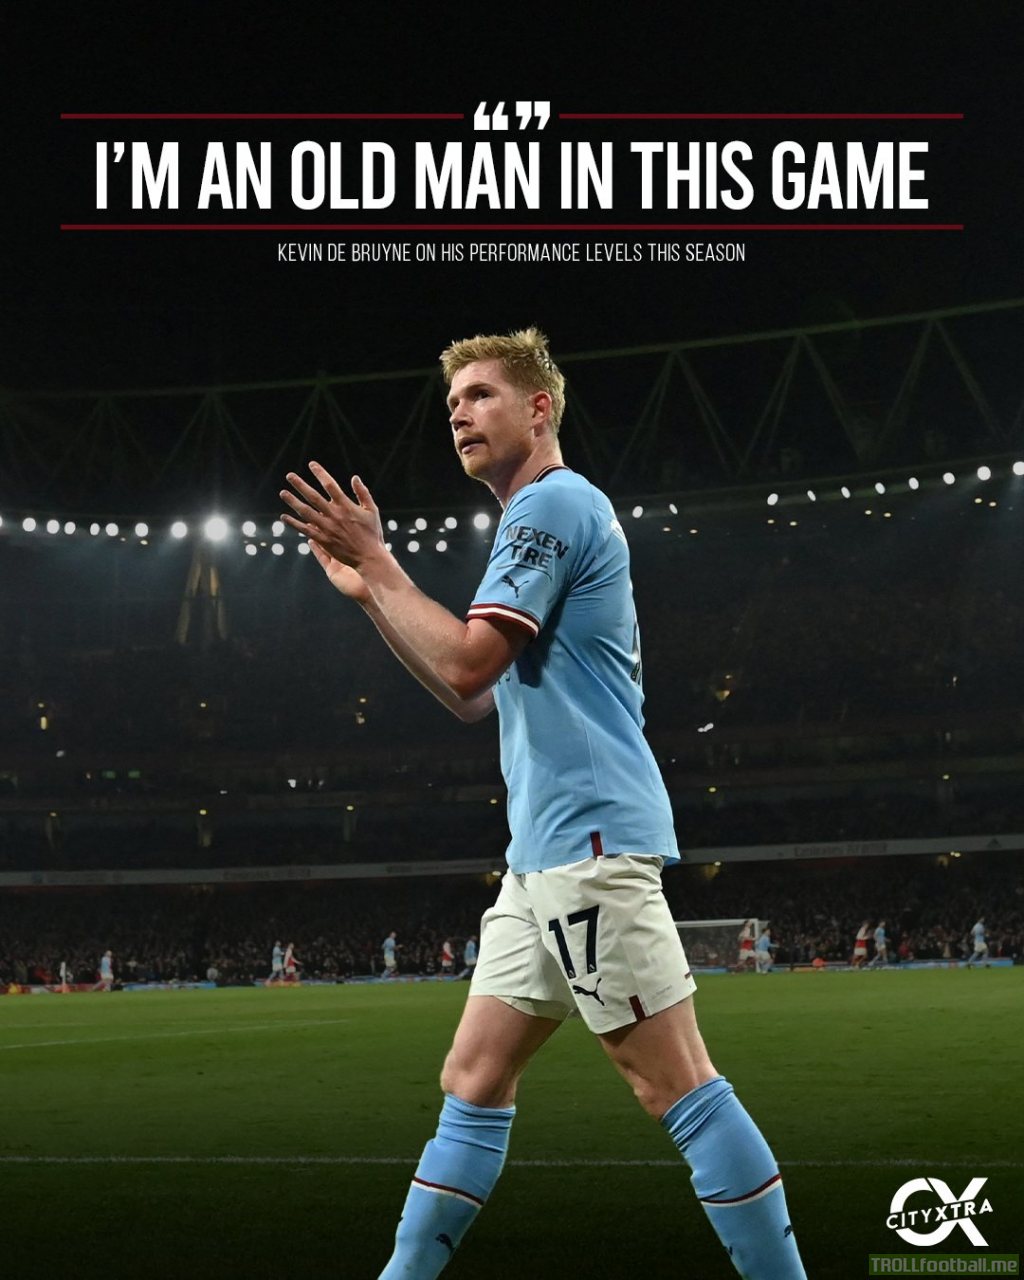 Kevin De Bruyne: "I'm an old man in this game, I know how it is. I'm fine. Obviously you want to play as much as possible but if you don't play, you do the best for 10 minutes and that's what I did [vs Crystal Palace] and get the win for the team..."